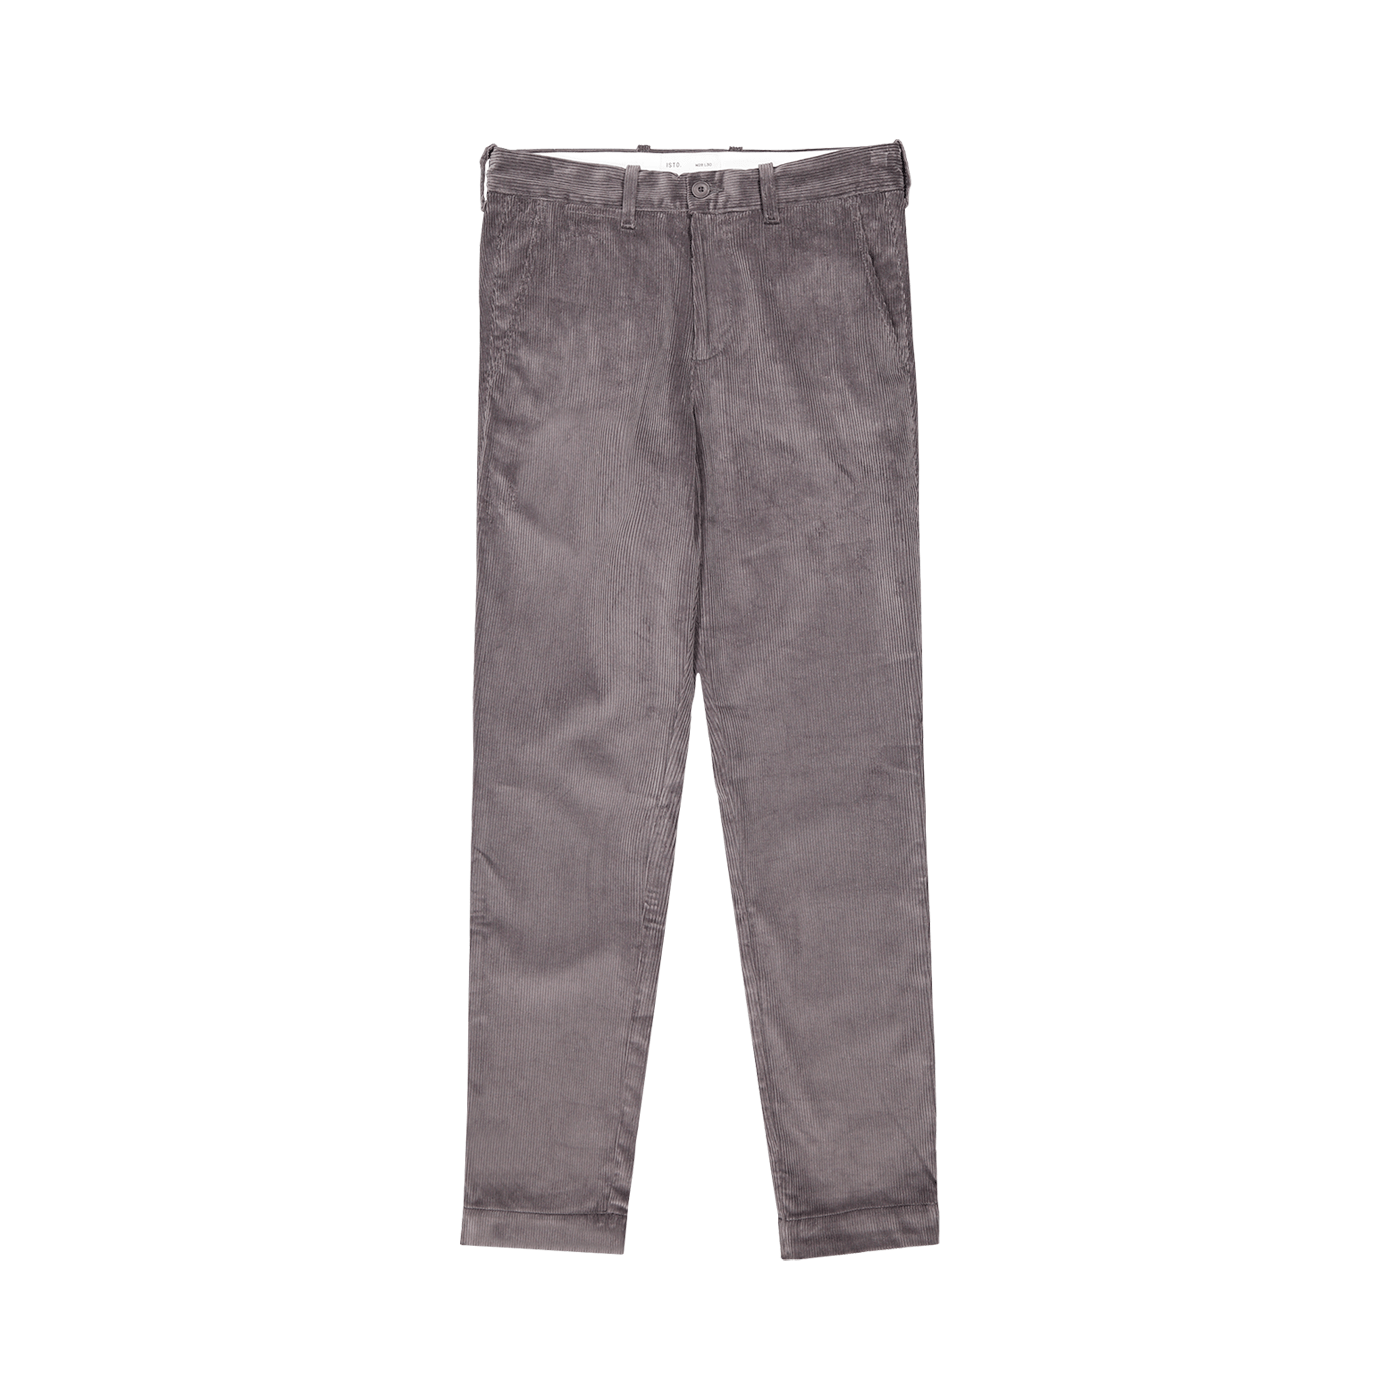 CORDUROY TROUSERS Trousers ISTO. Washed Grey W28-L30 